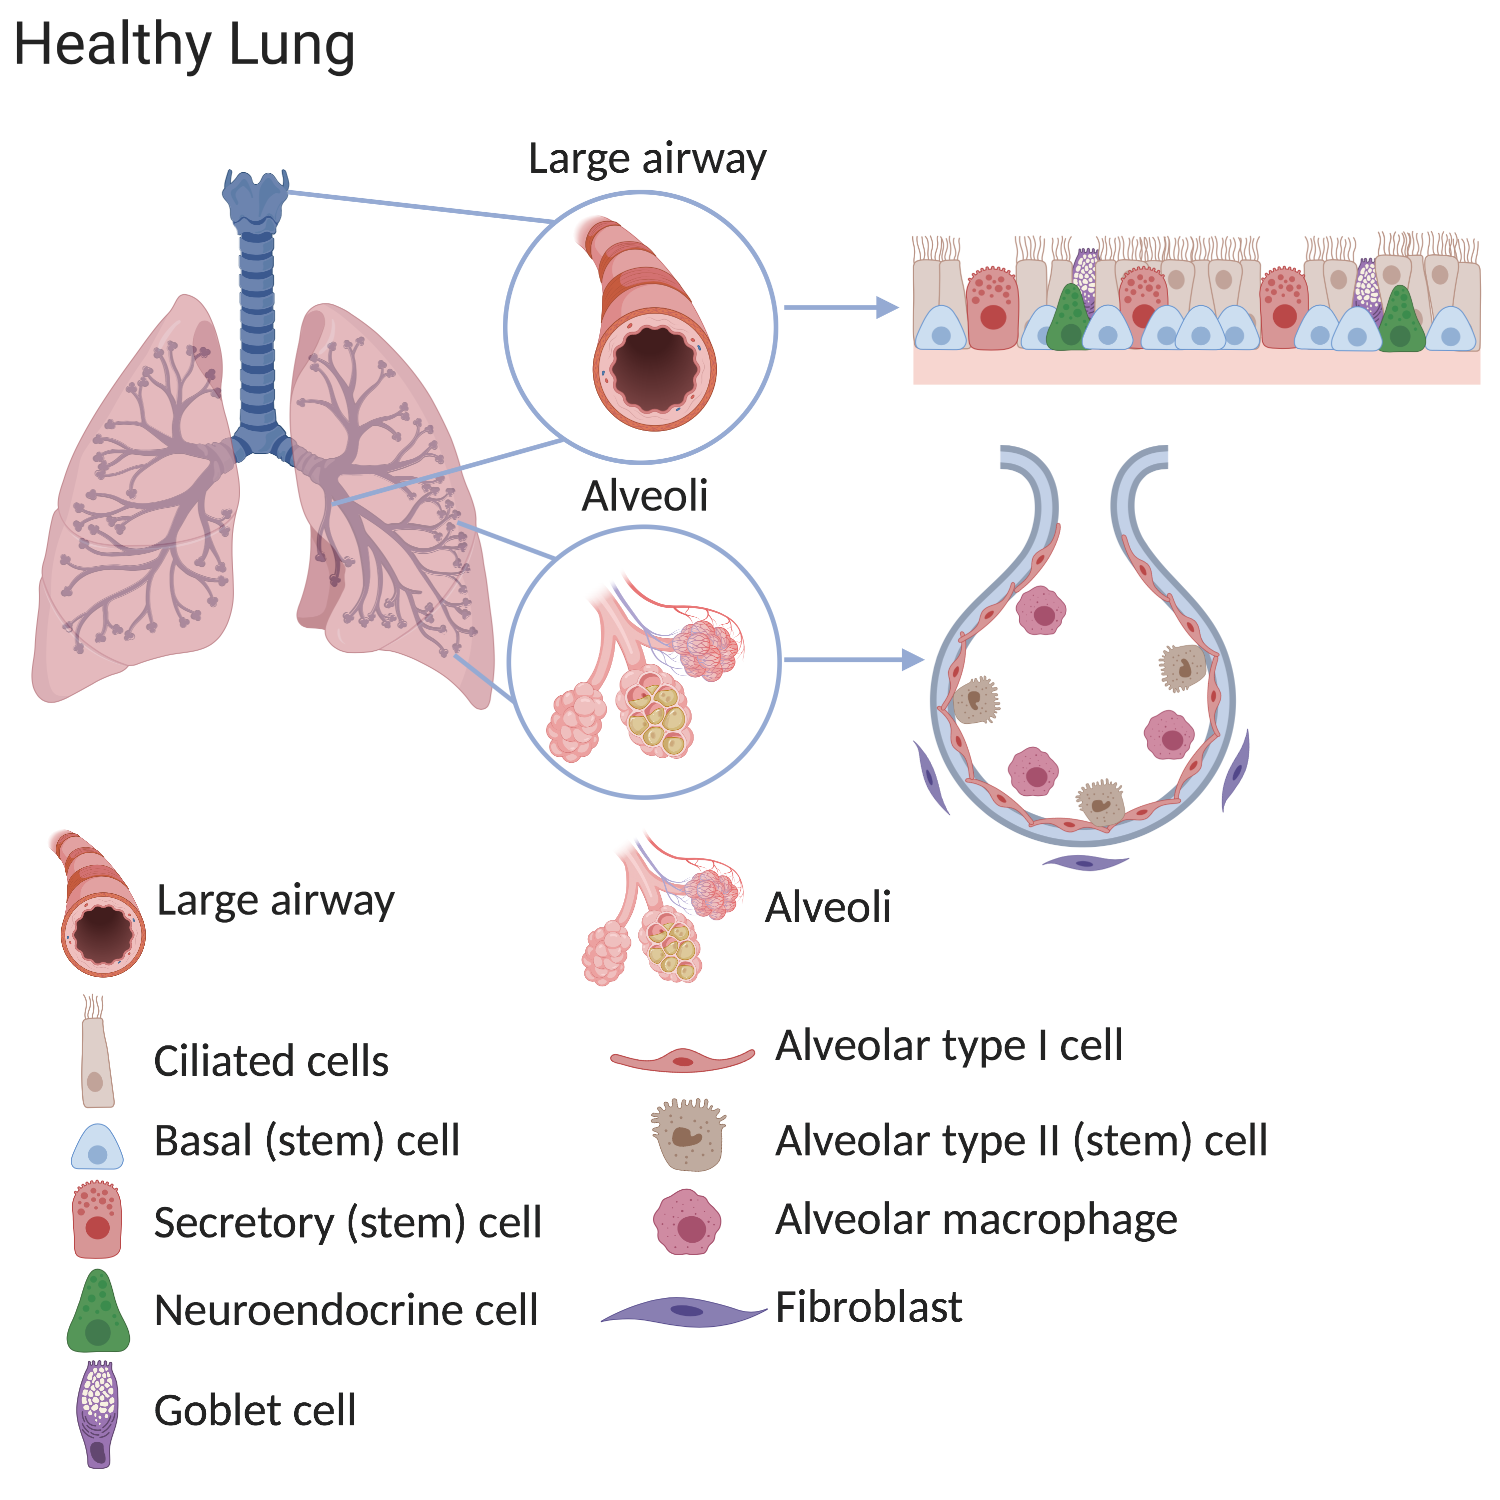 Diagram of stem cells in a healthy lung